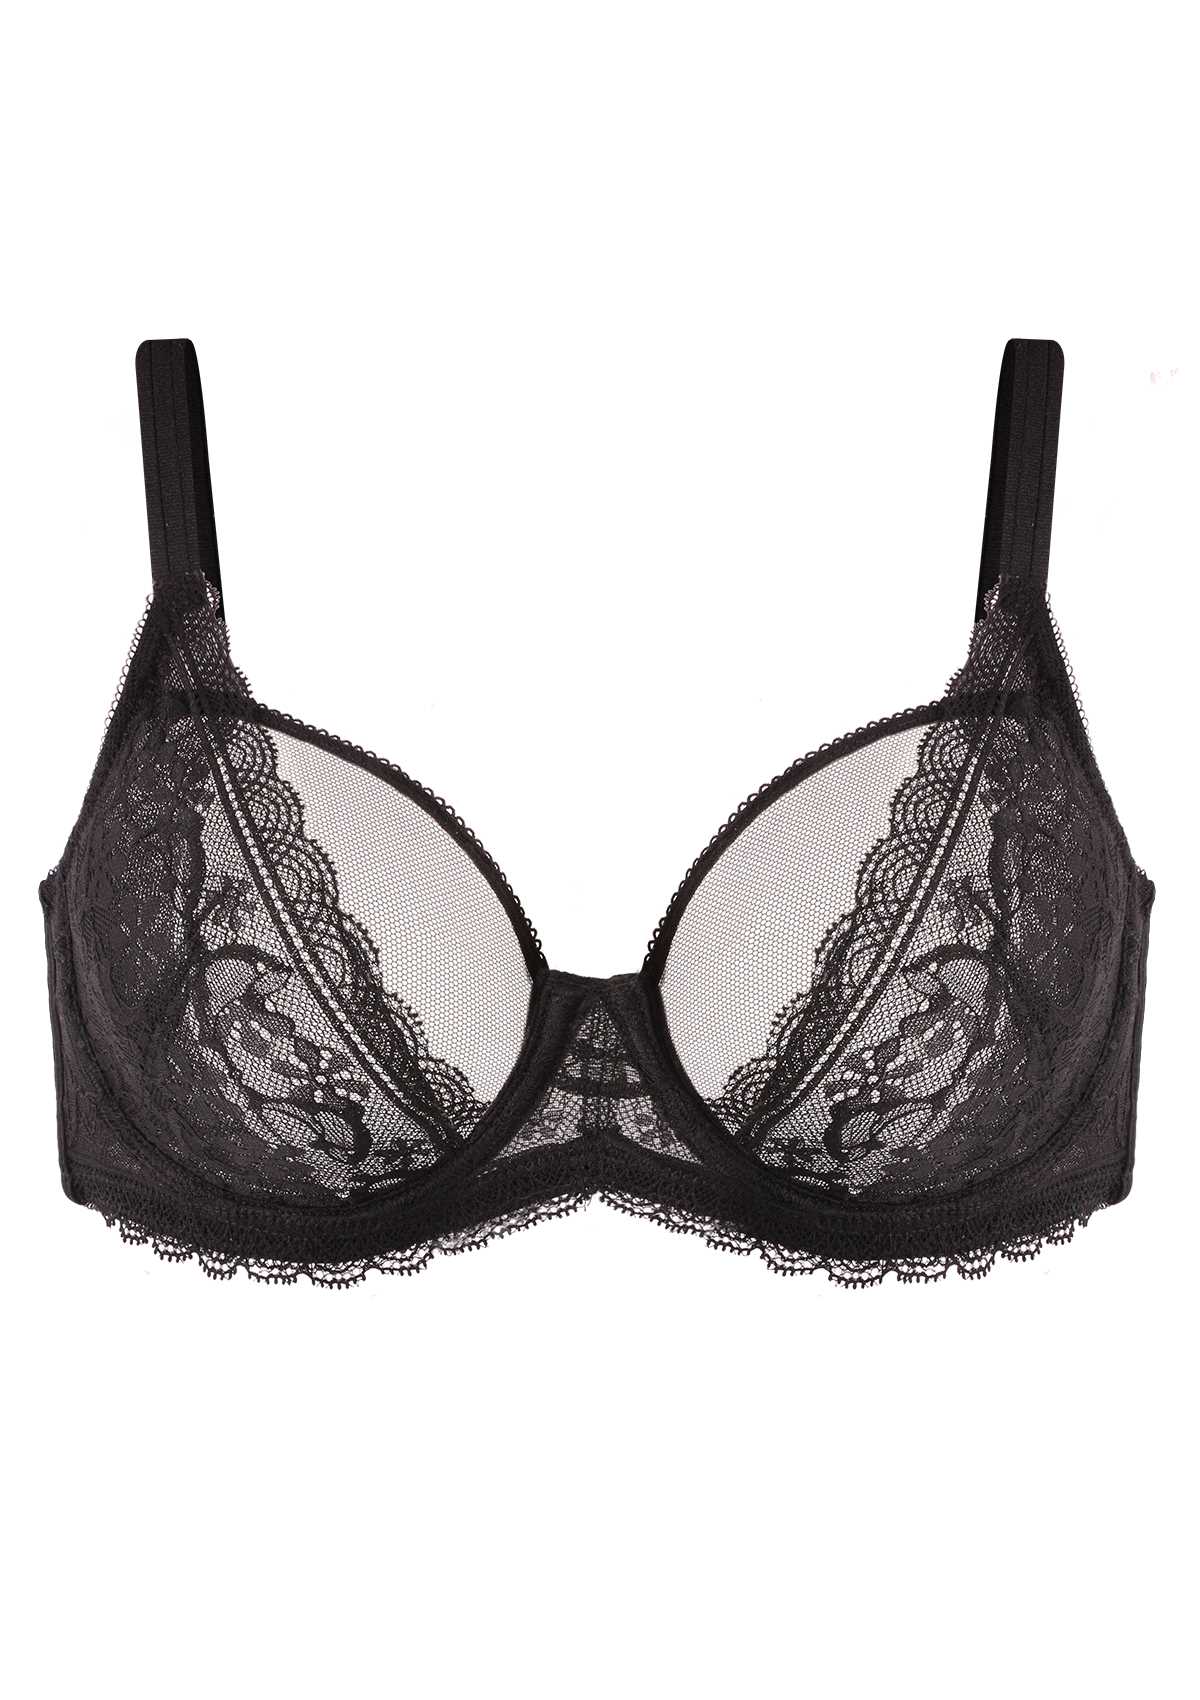 HSIA Anemone Lace Bra And Panties: Back Support Wired Bra - Black / 36 / DD/E